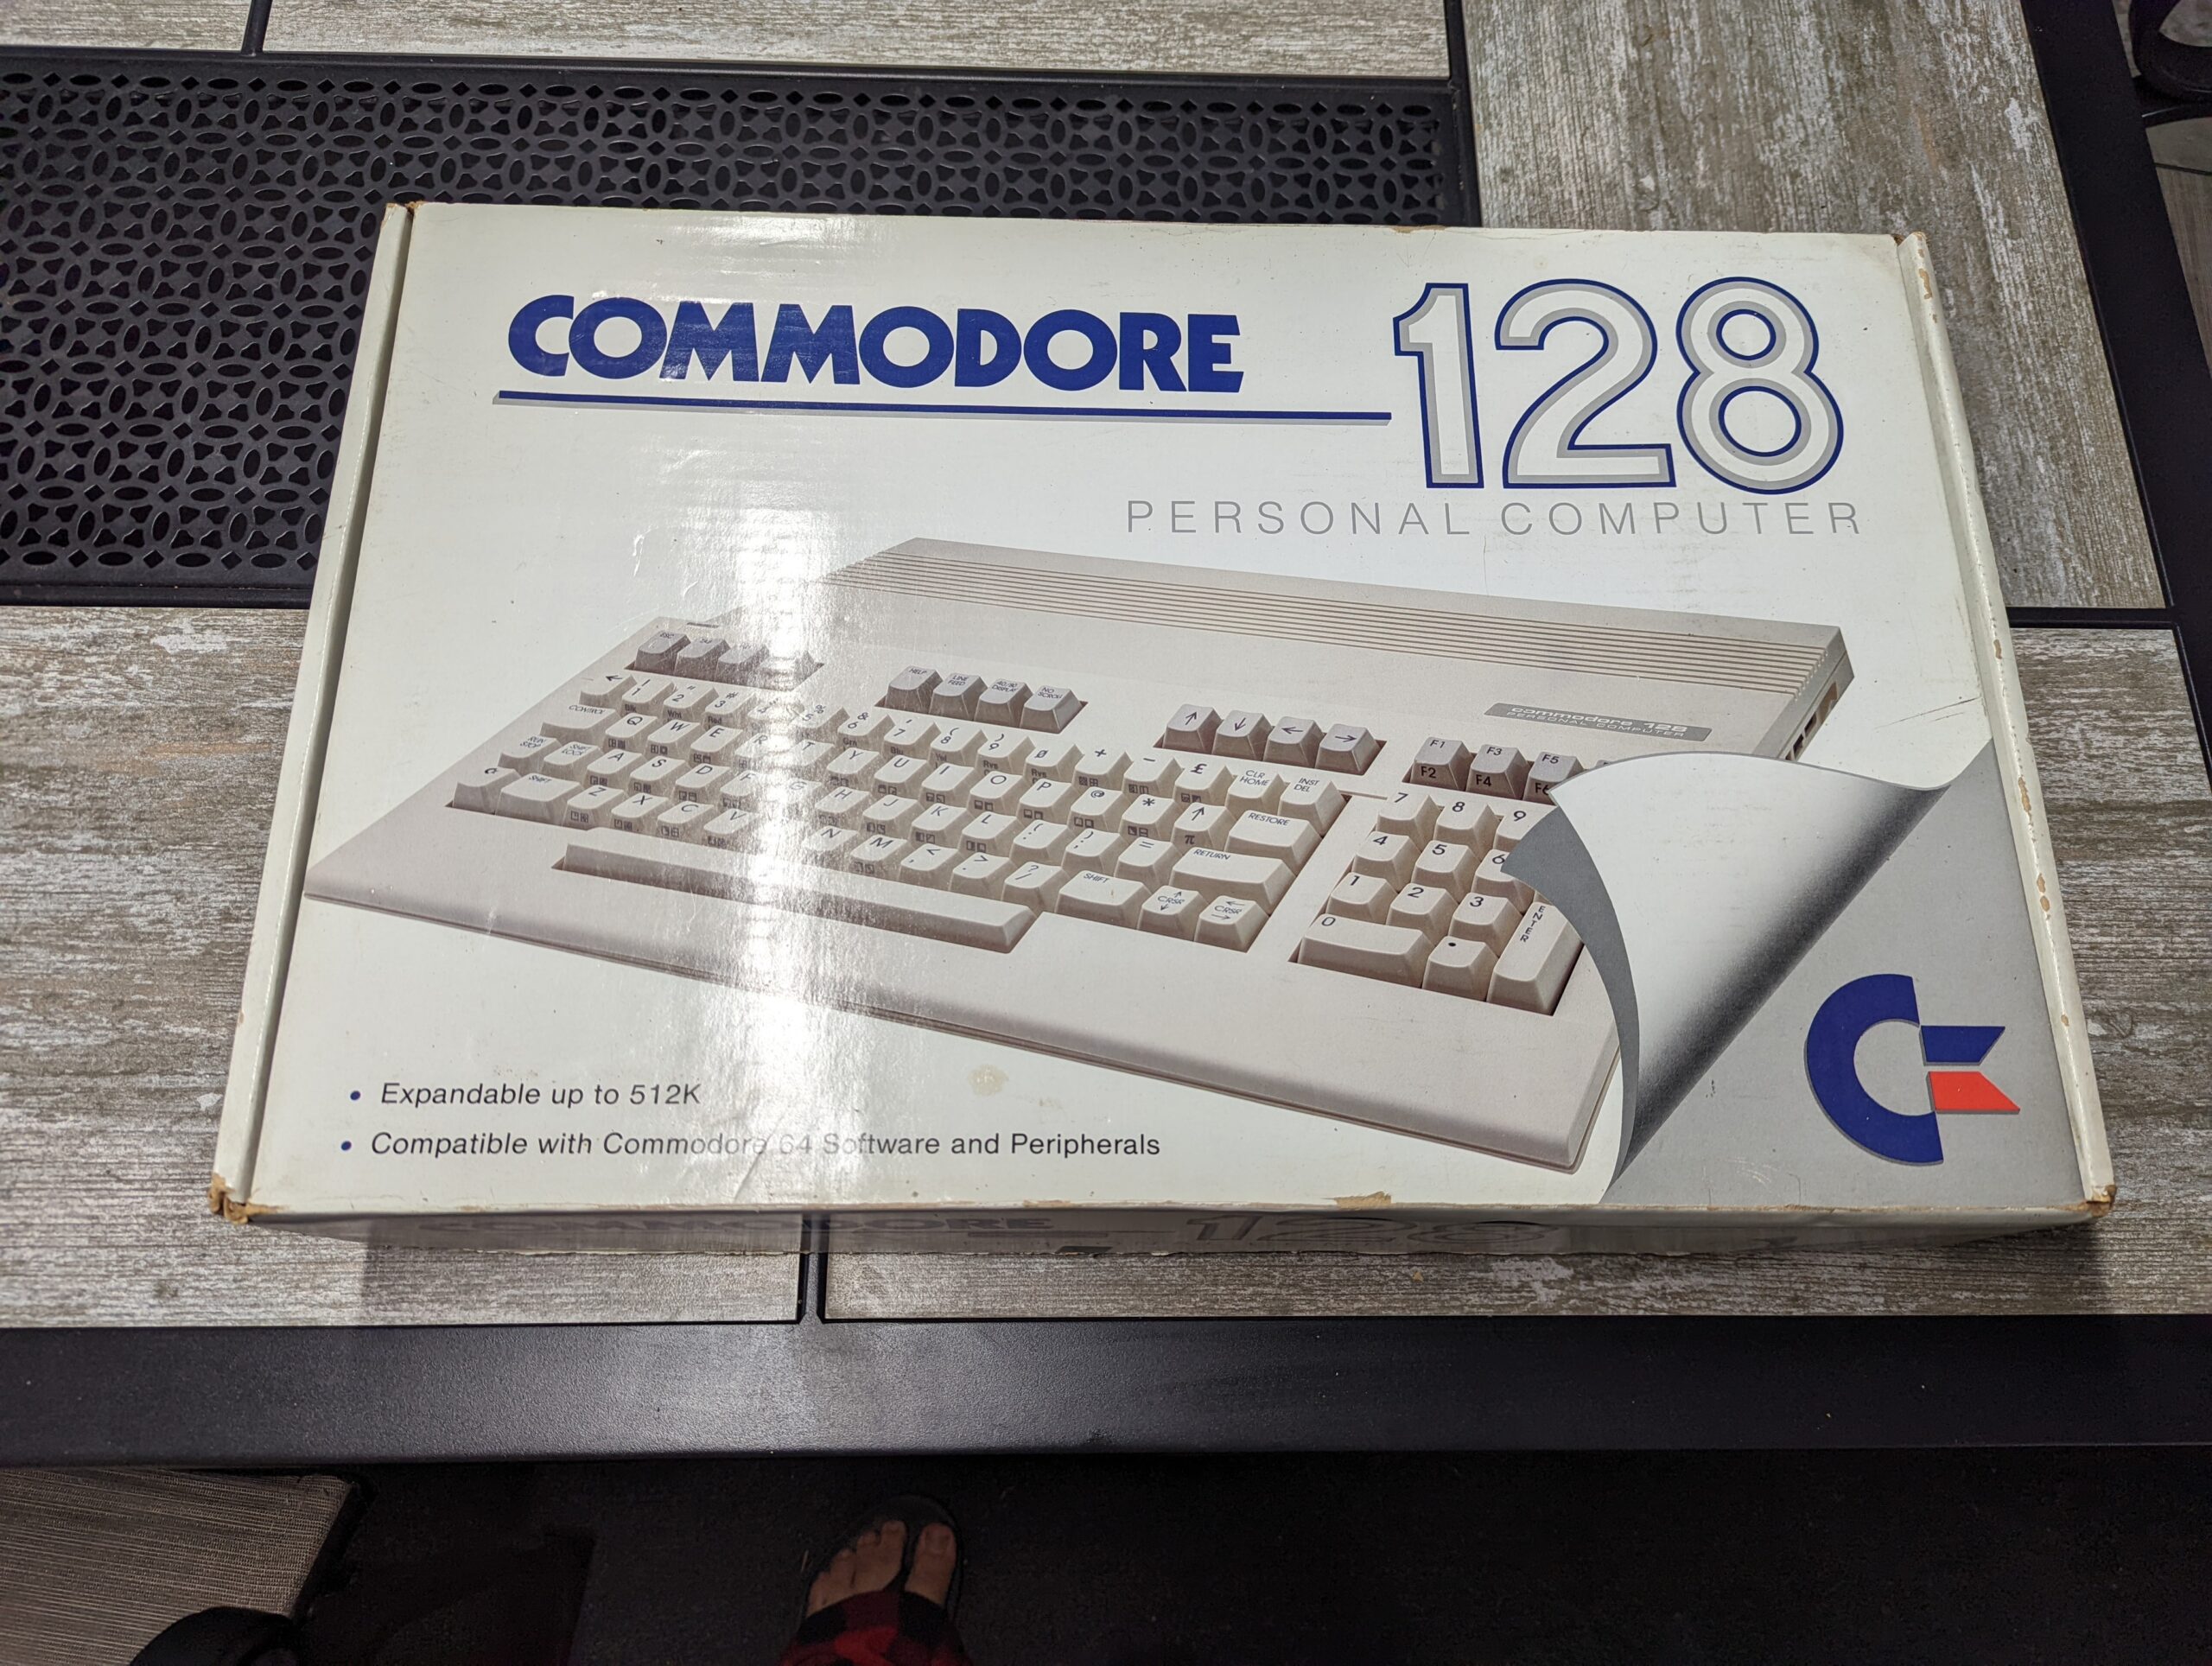 Let’s See What Happens When I Test A Vintage Commodore 128 saved From e-waste. What ancient secrets will be Uncovered?